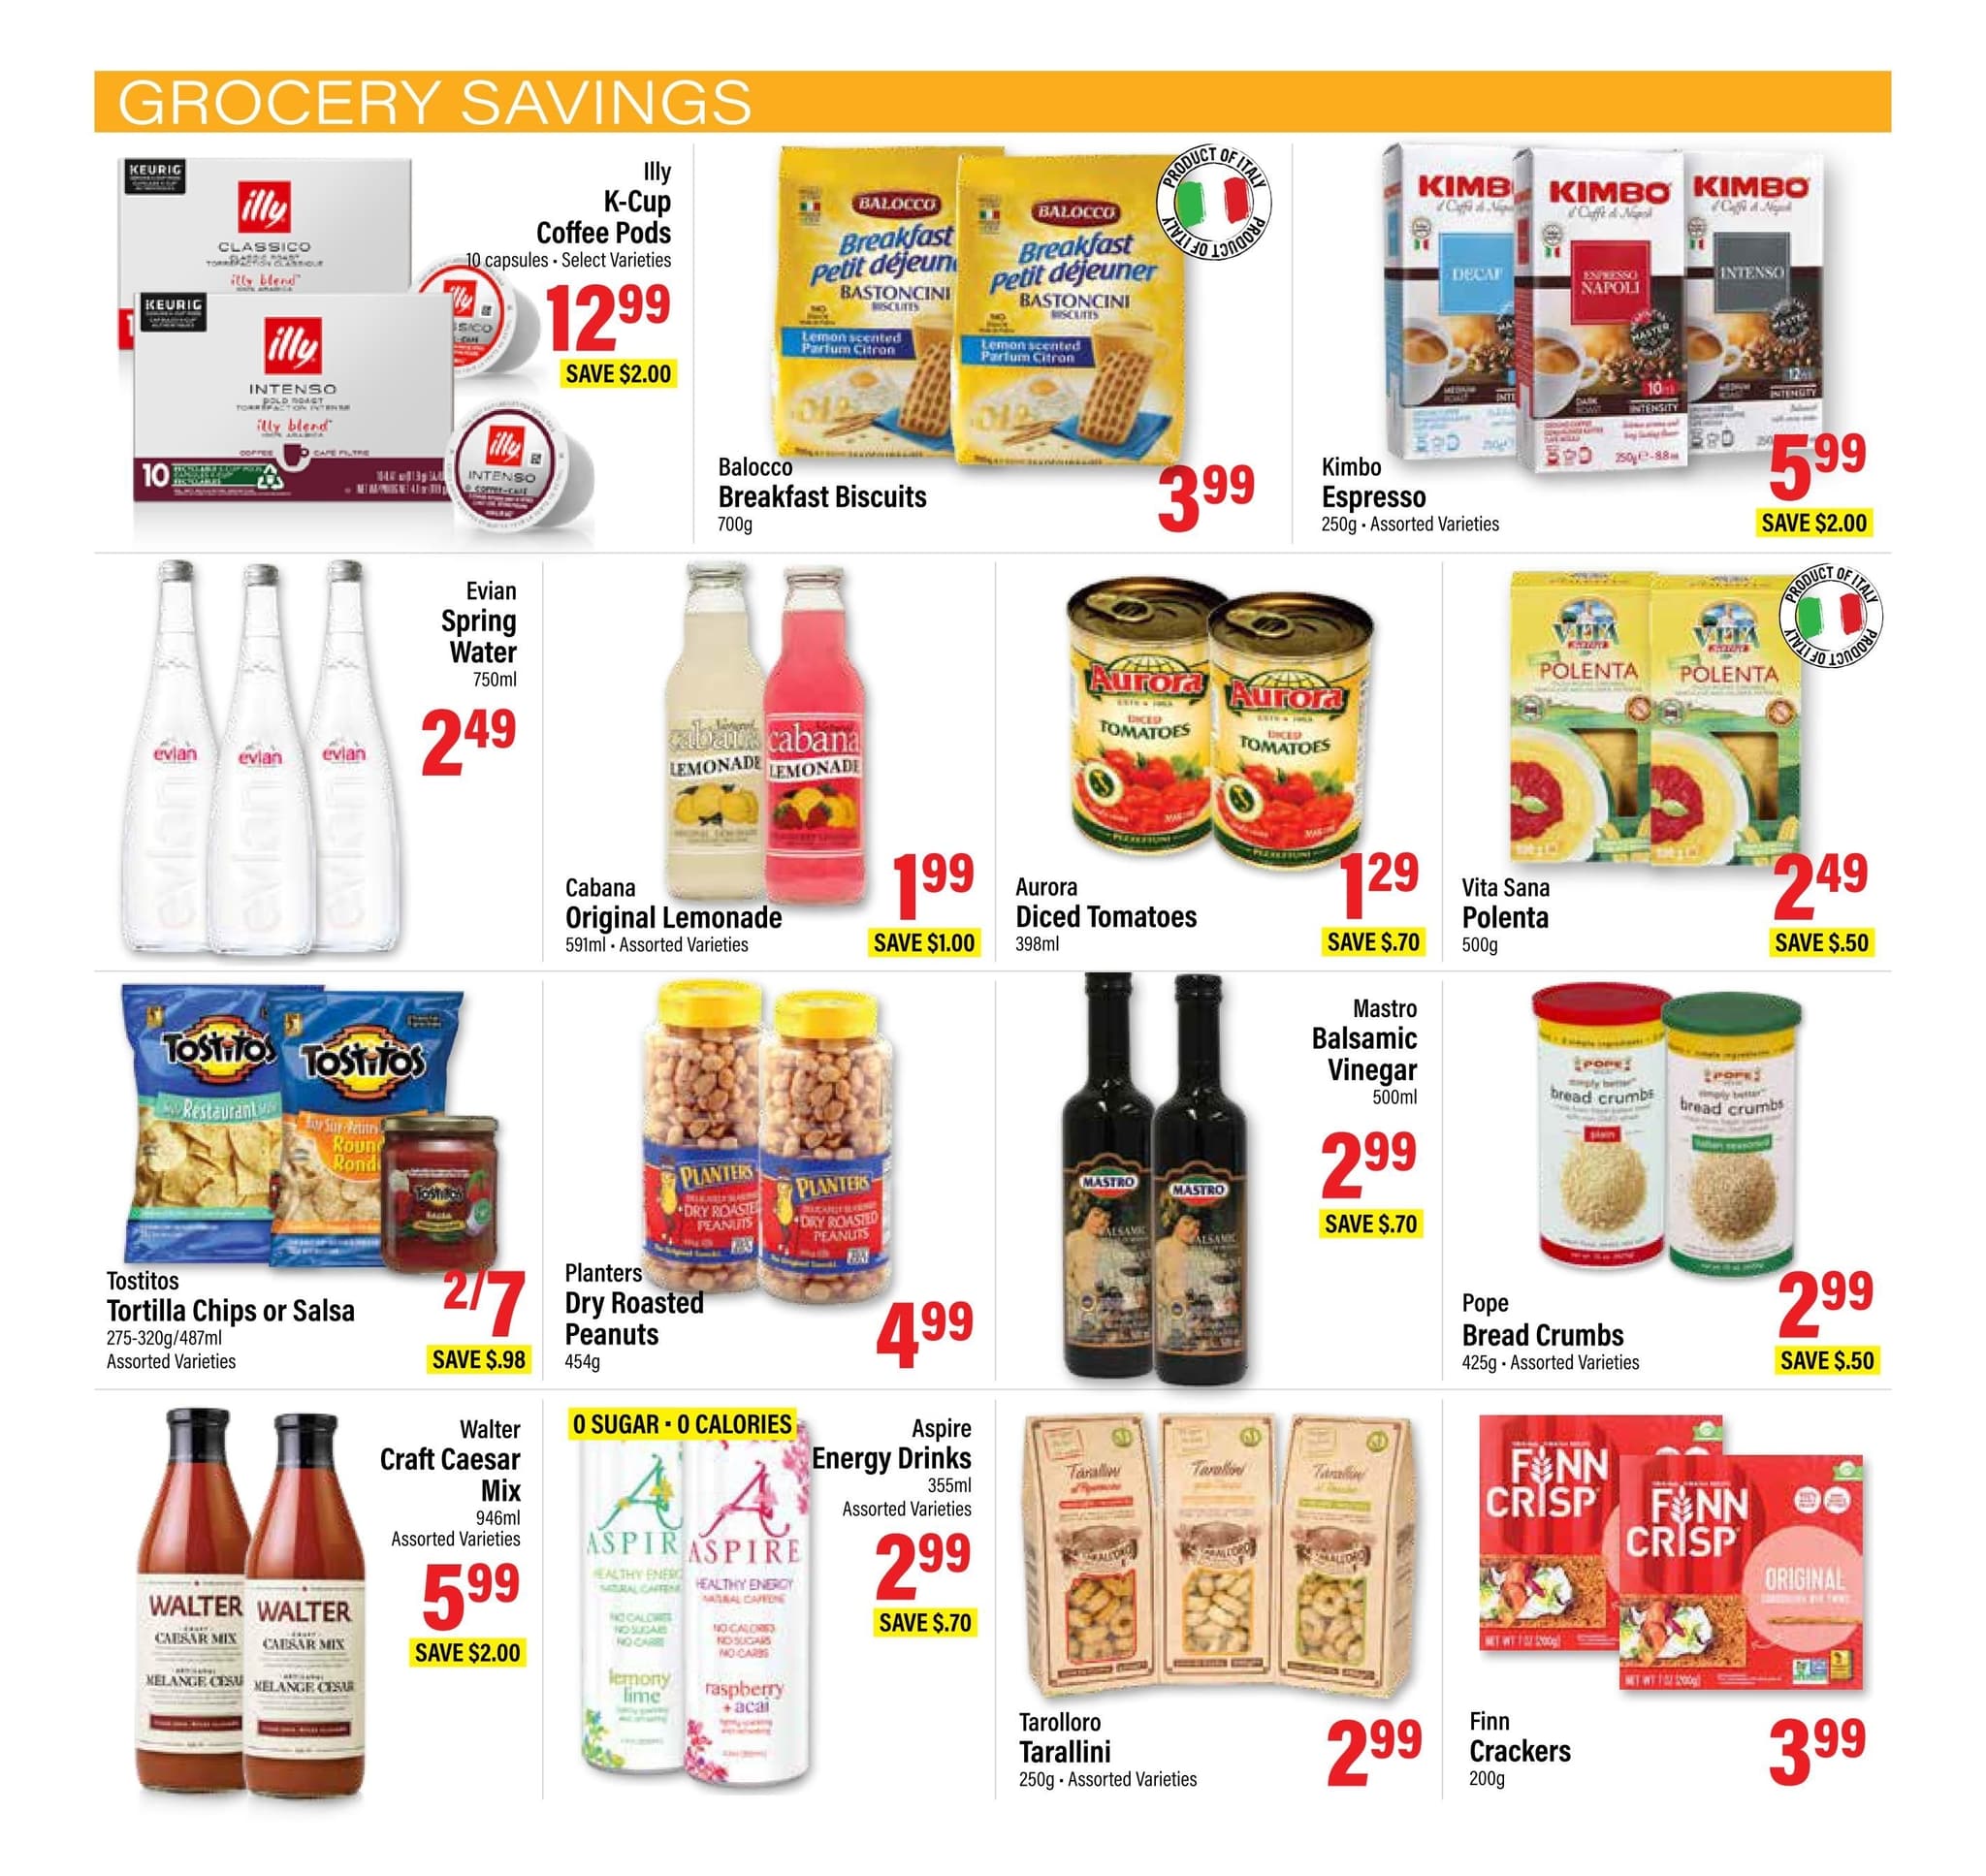 Commisso's Fresh Foods - Weekly Flyer Specials - Page 2